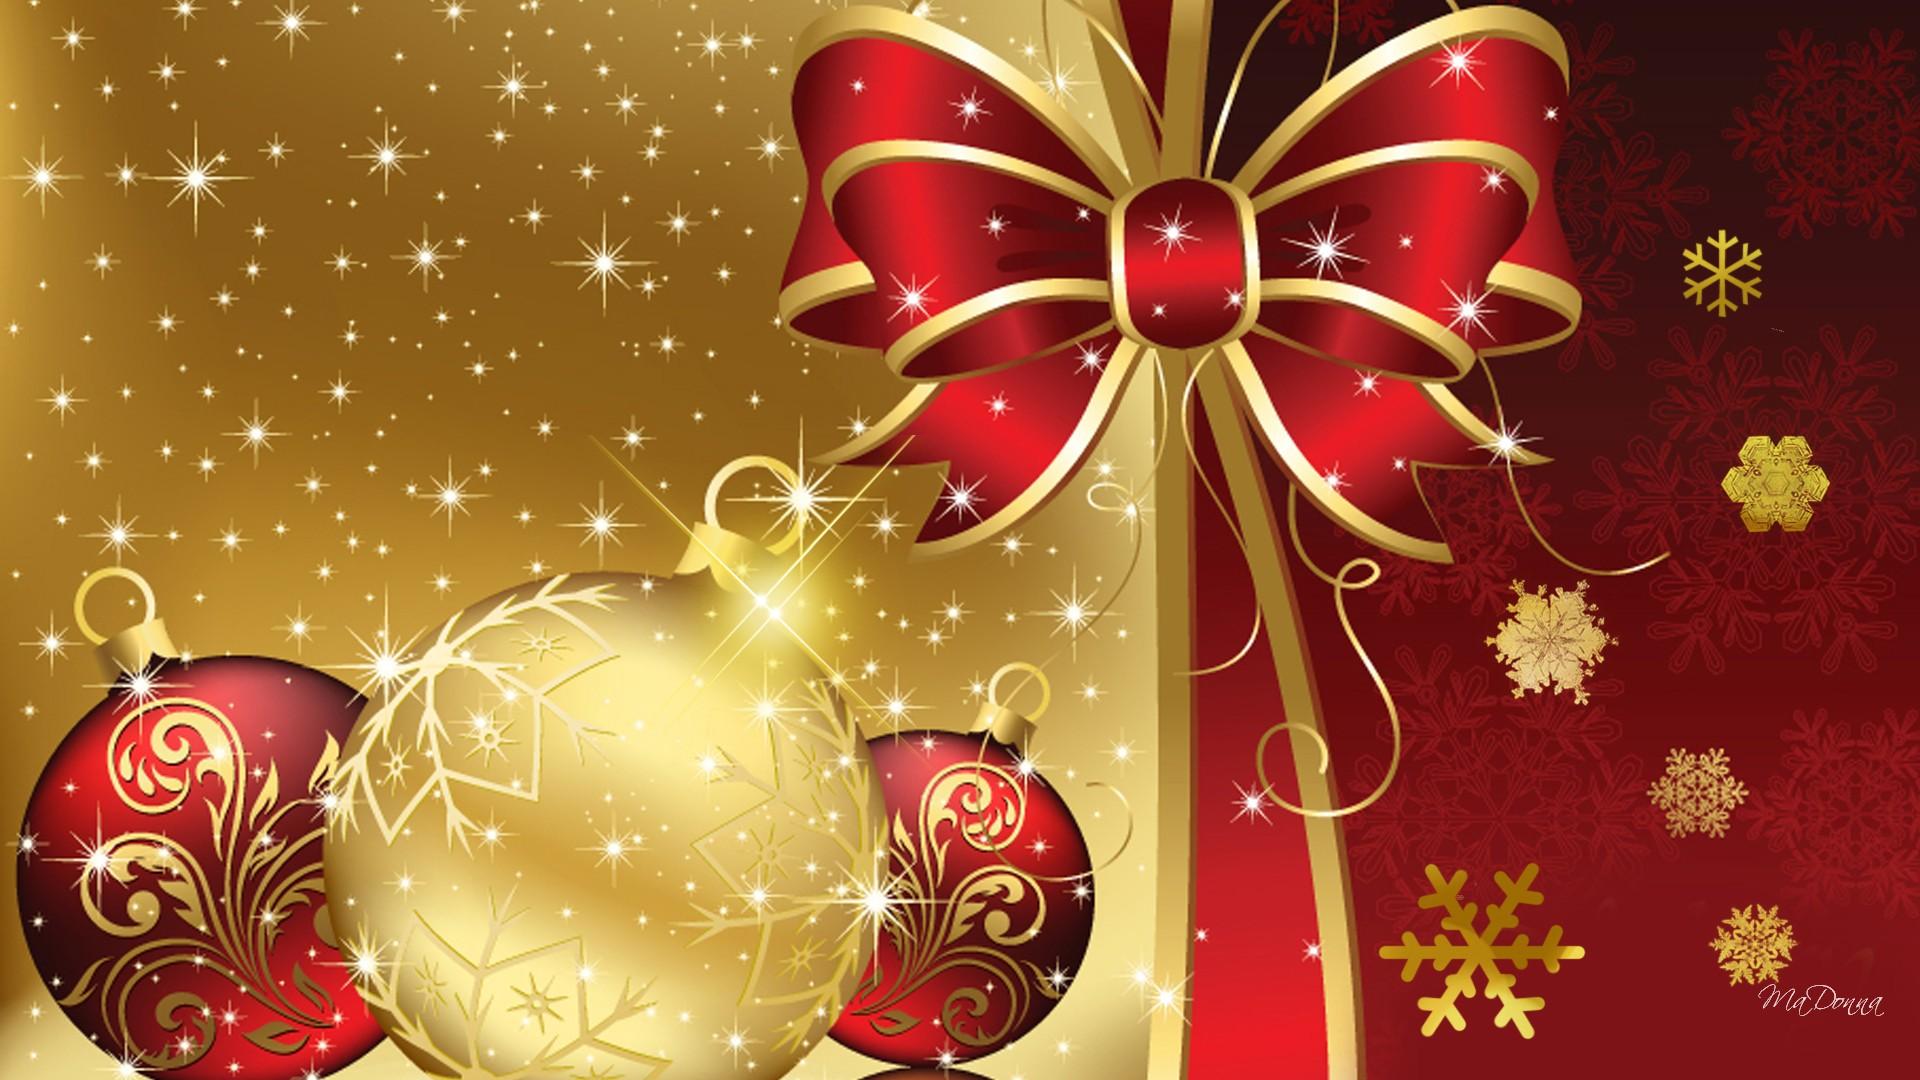 Merry Christmas 2019 Free HD Wallpapers - Let Us Publish